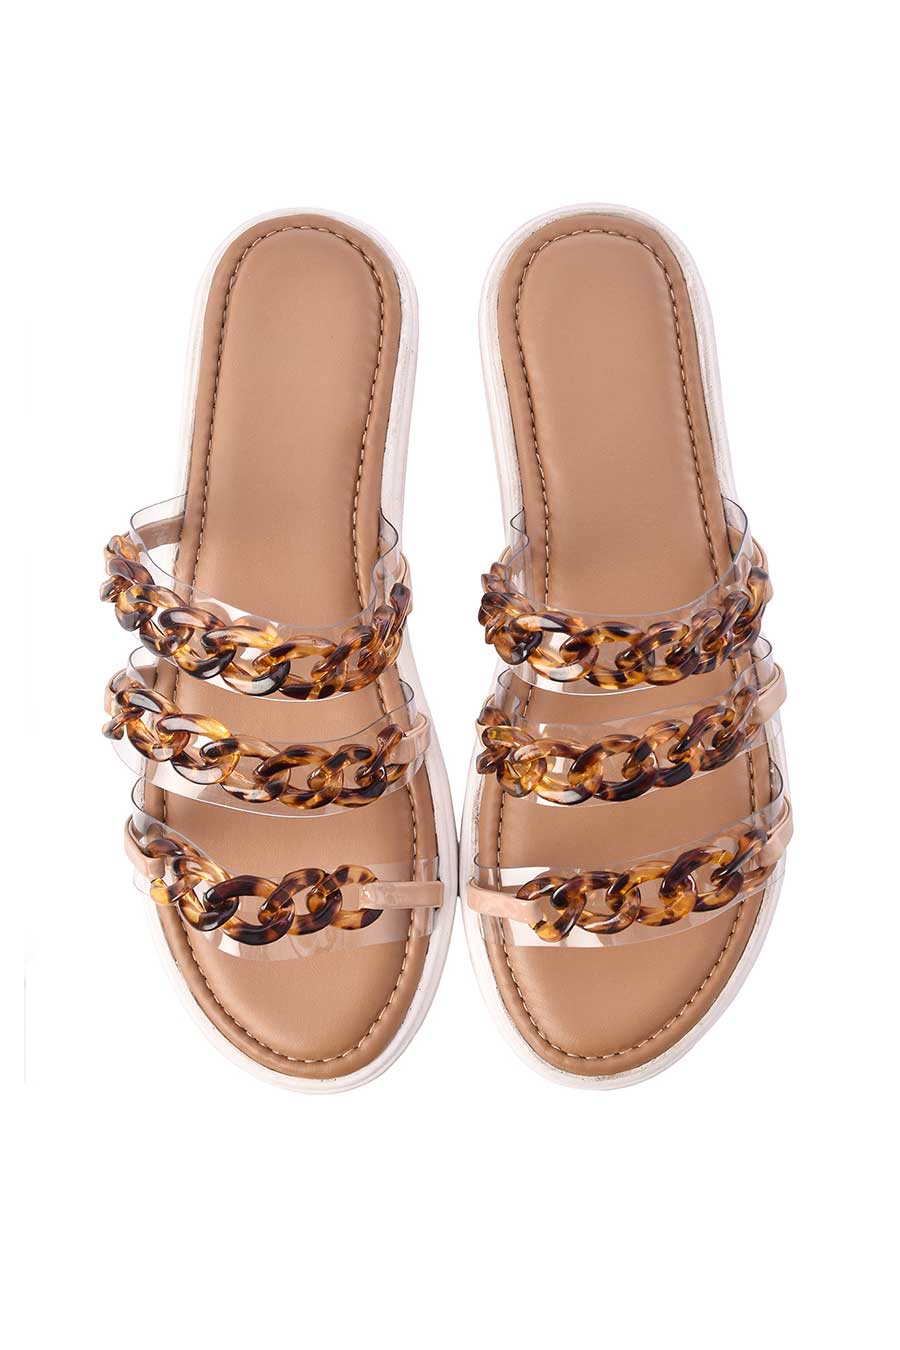 Nude Comfort Flats With Brown Chain